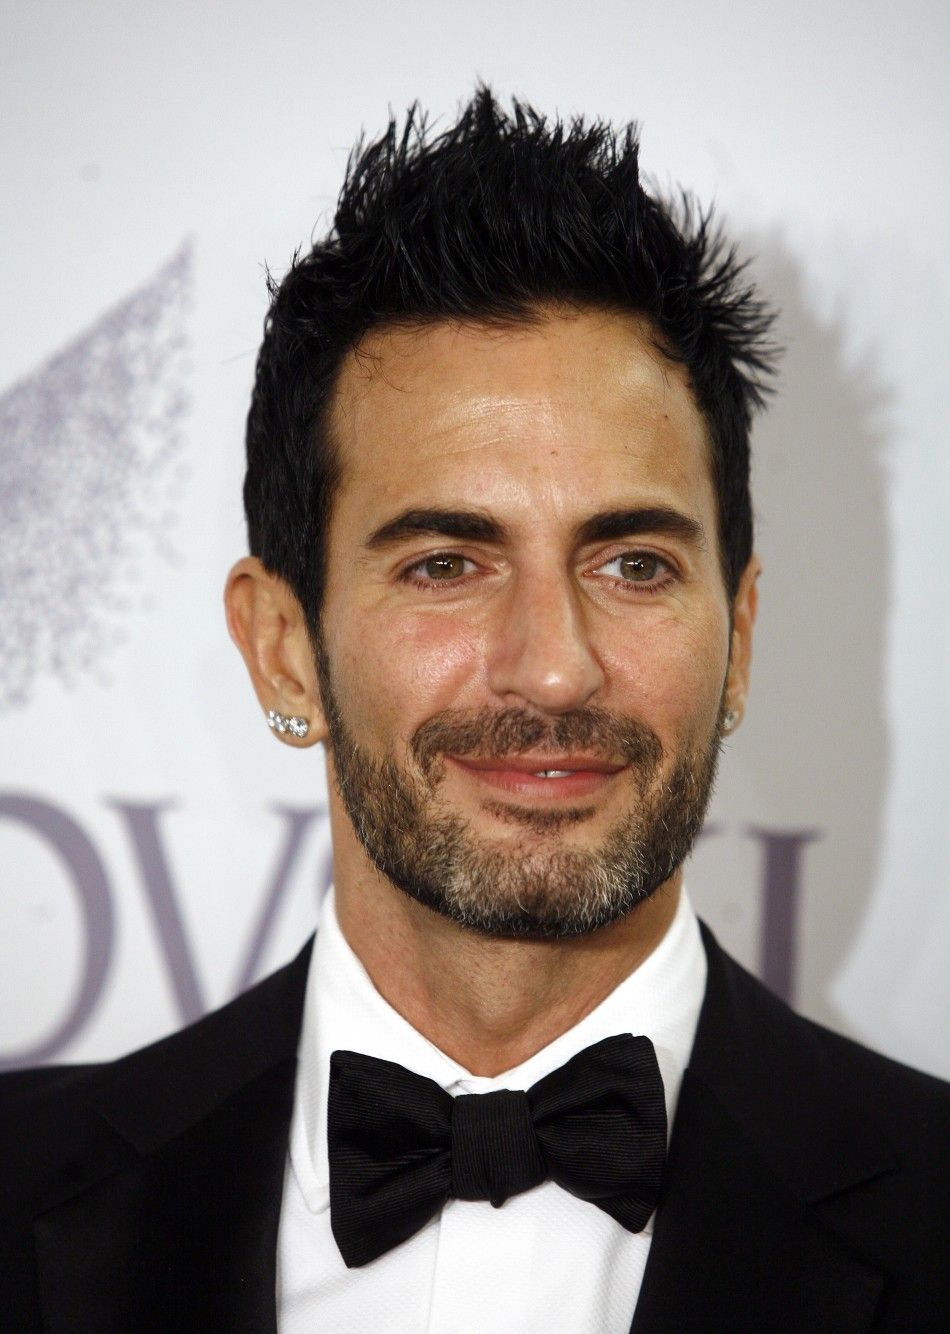 Marc Jacobs in talks to succeed John Galliano as head of Christian